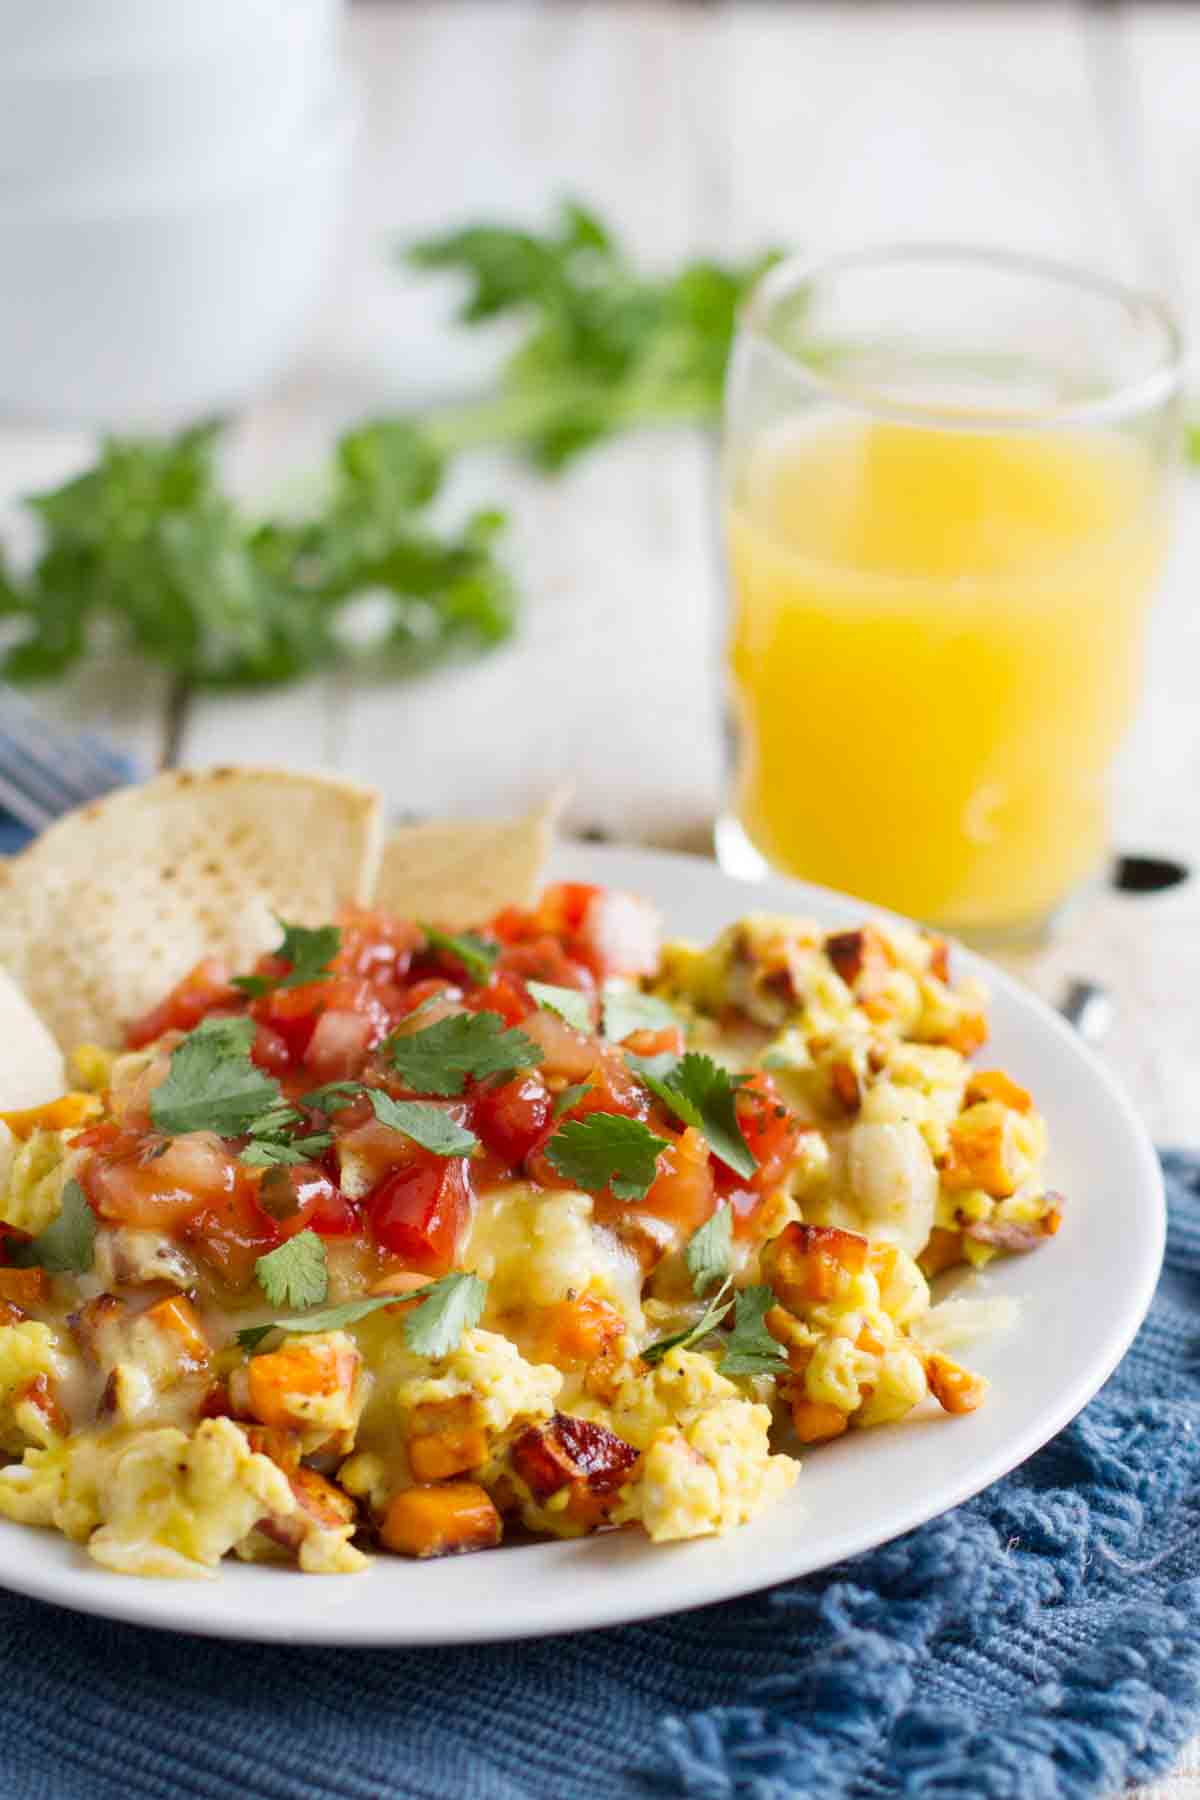 plate with scrambled eggs made with sweet potatoes and Mexican flavors